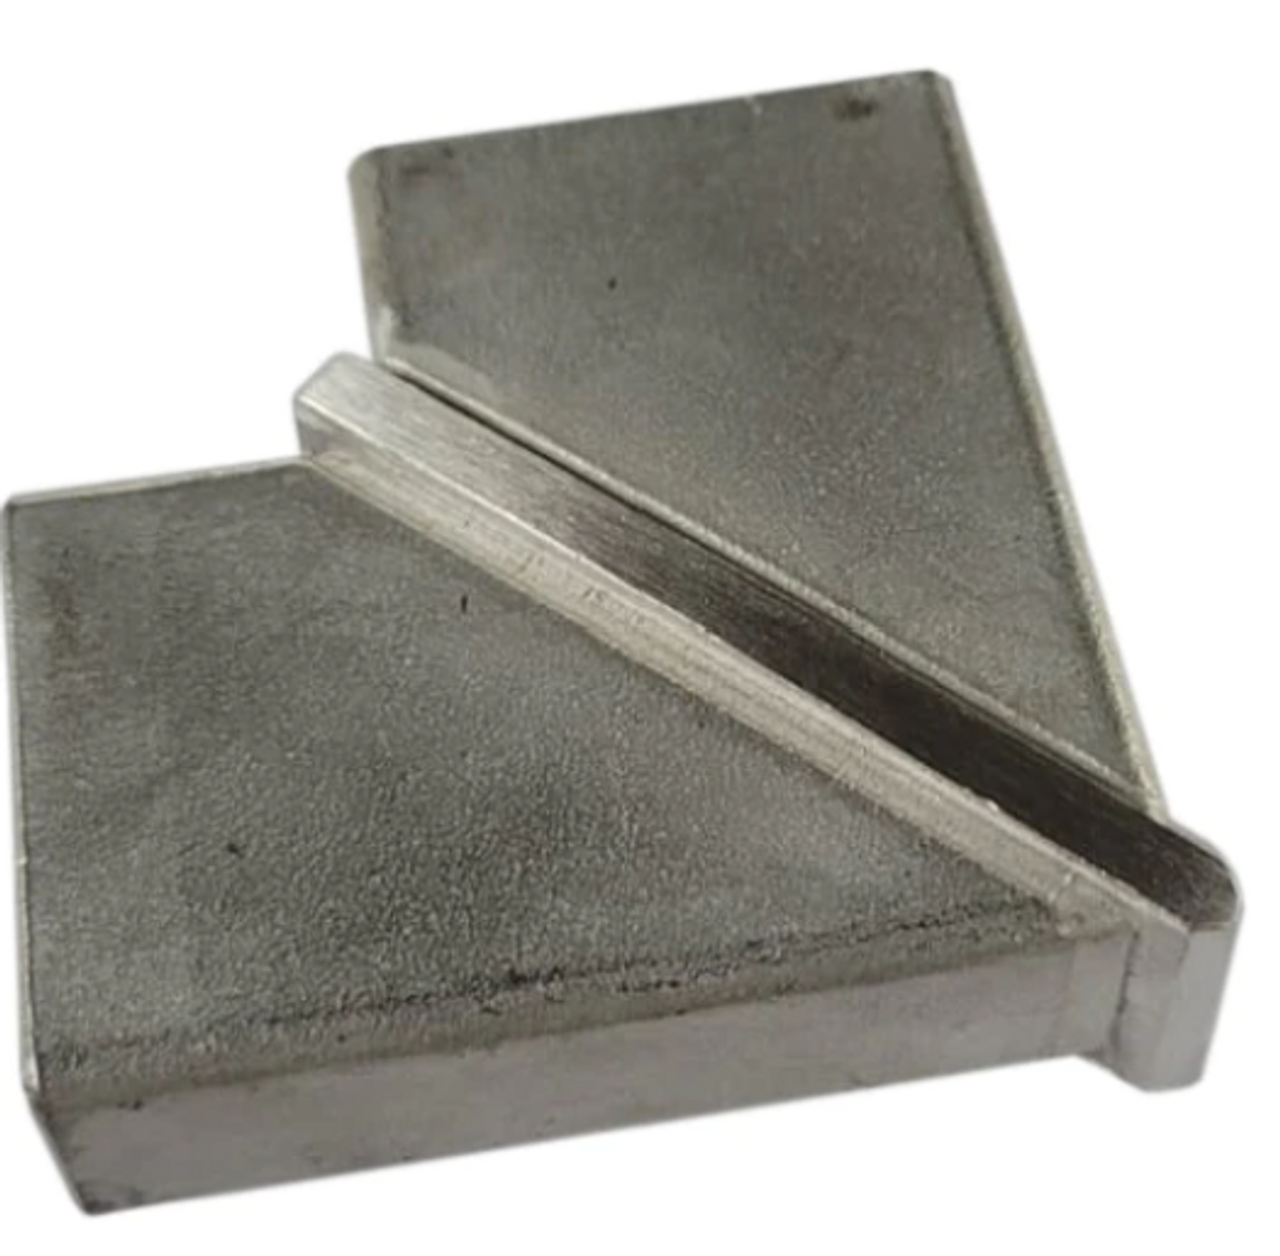 90 Degree Connector for 2x1 Rectangular Handrail Brushed Stainless